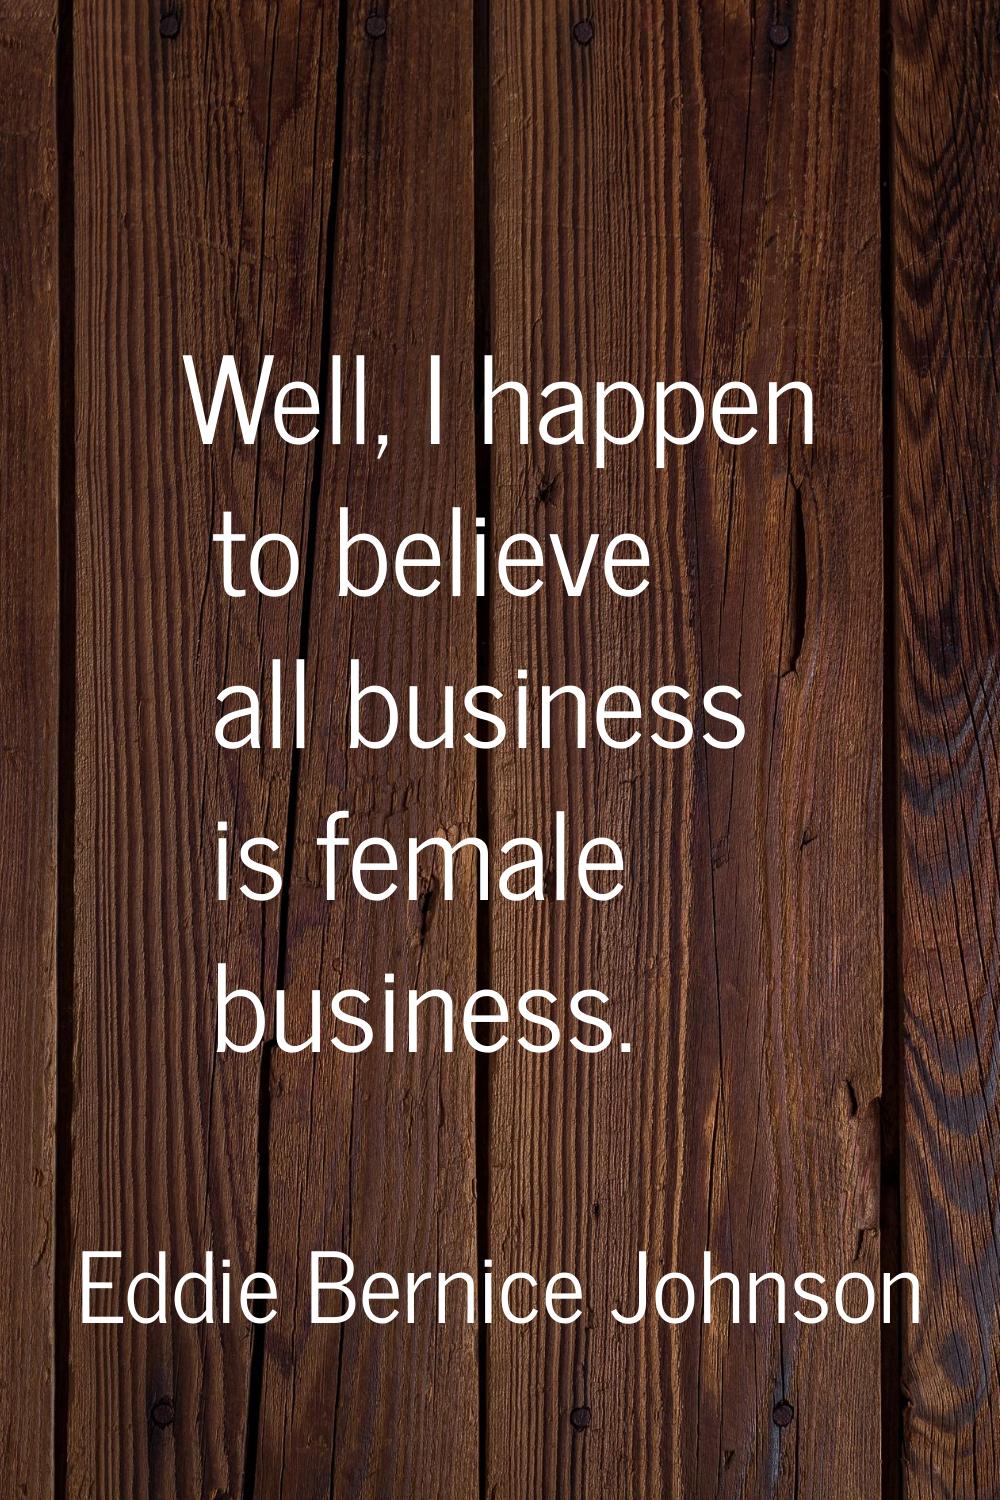 Well, I happen to believe all business is female business.